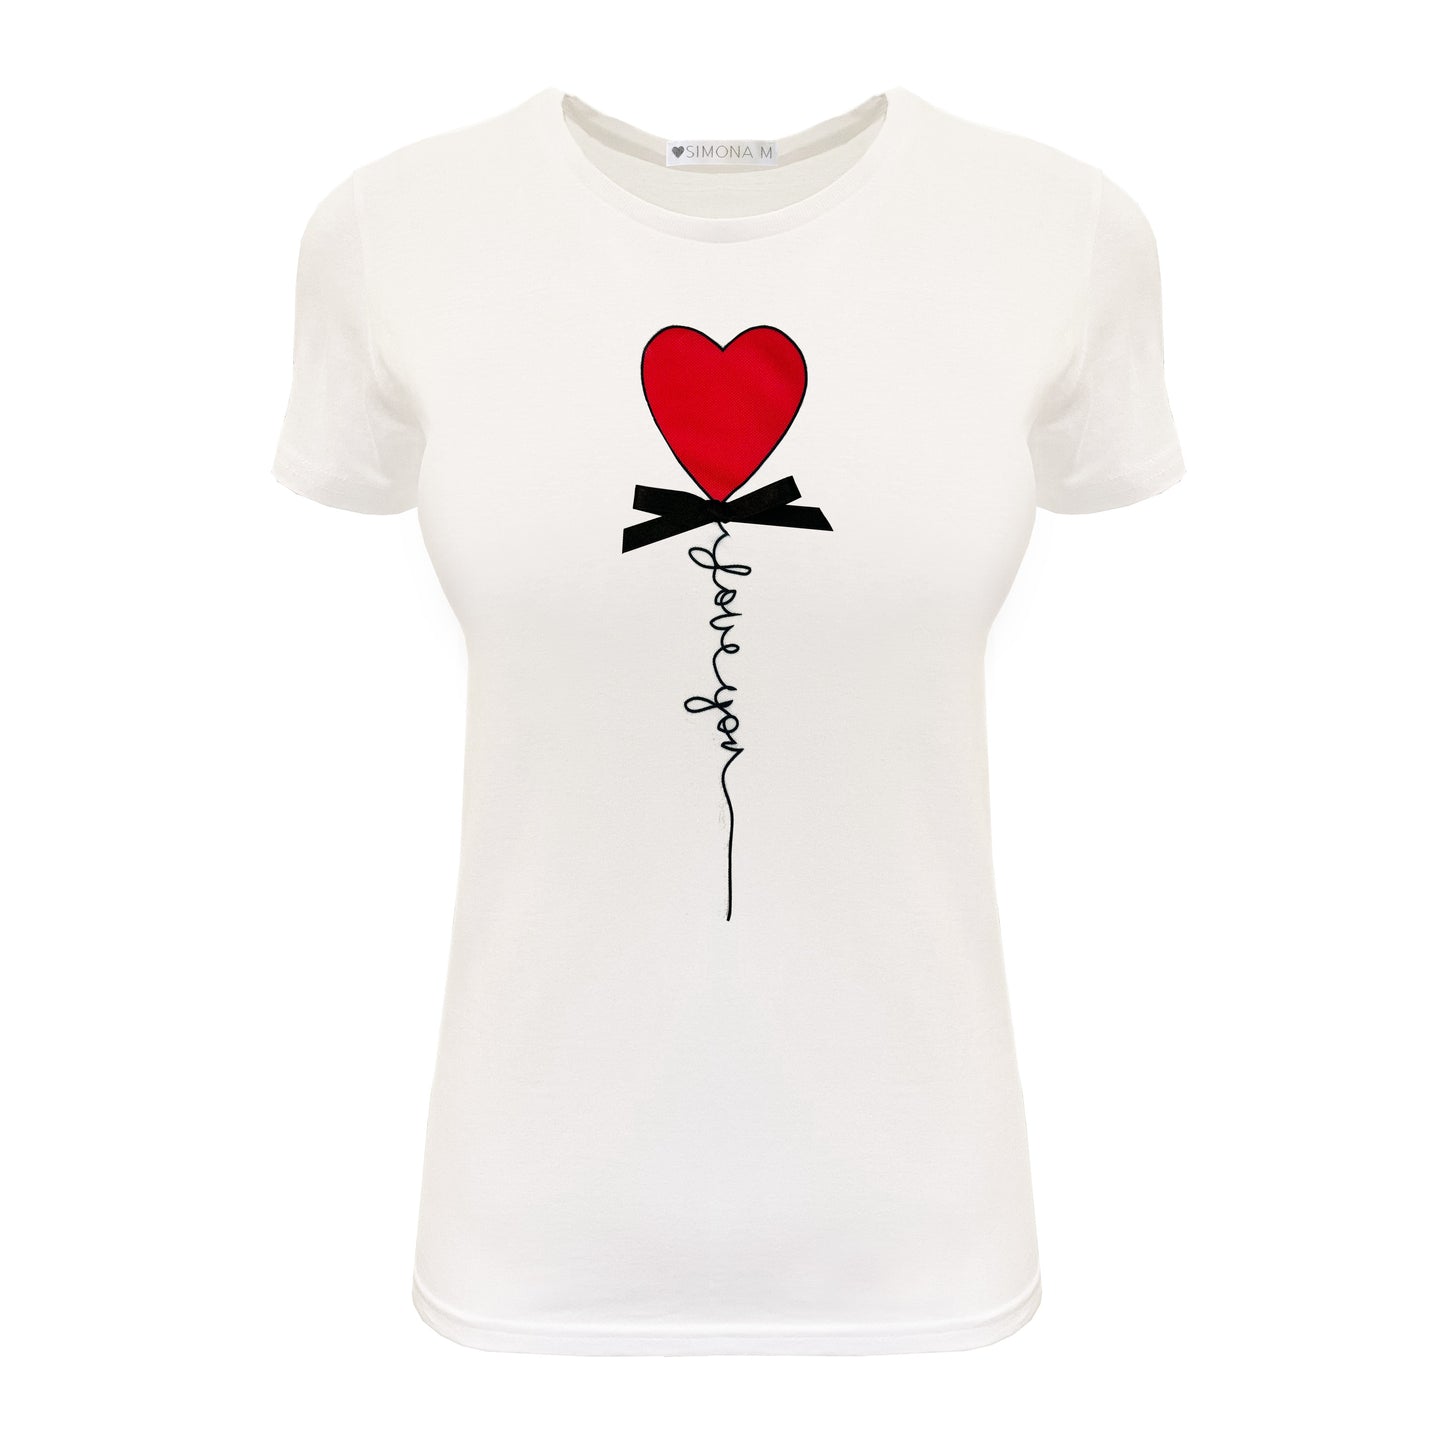 My t-shirt love palloncino rosso